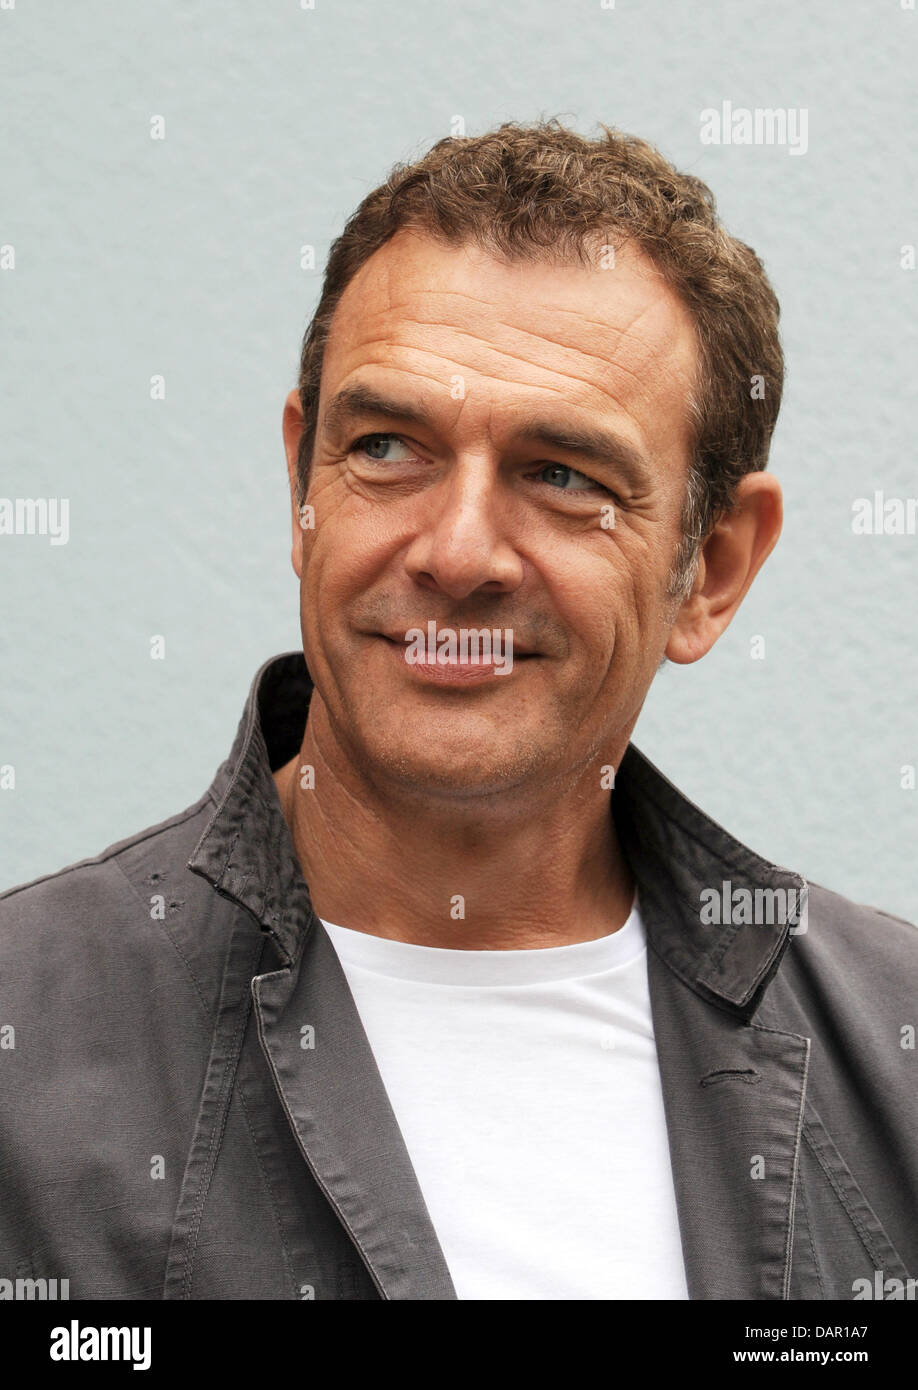 Actor Jean-Yves Berteloot as Marc von der Lohe poses during filming for the  German television broadcaster ZDF's production of "Ein Sommer im Elsass"  ("A Summer in Alsace") in Bergheim, France, 08 September